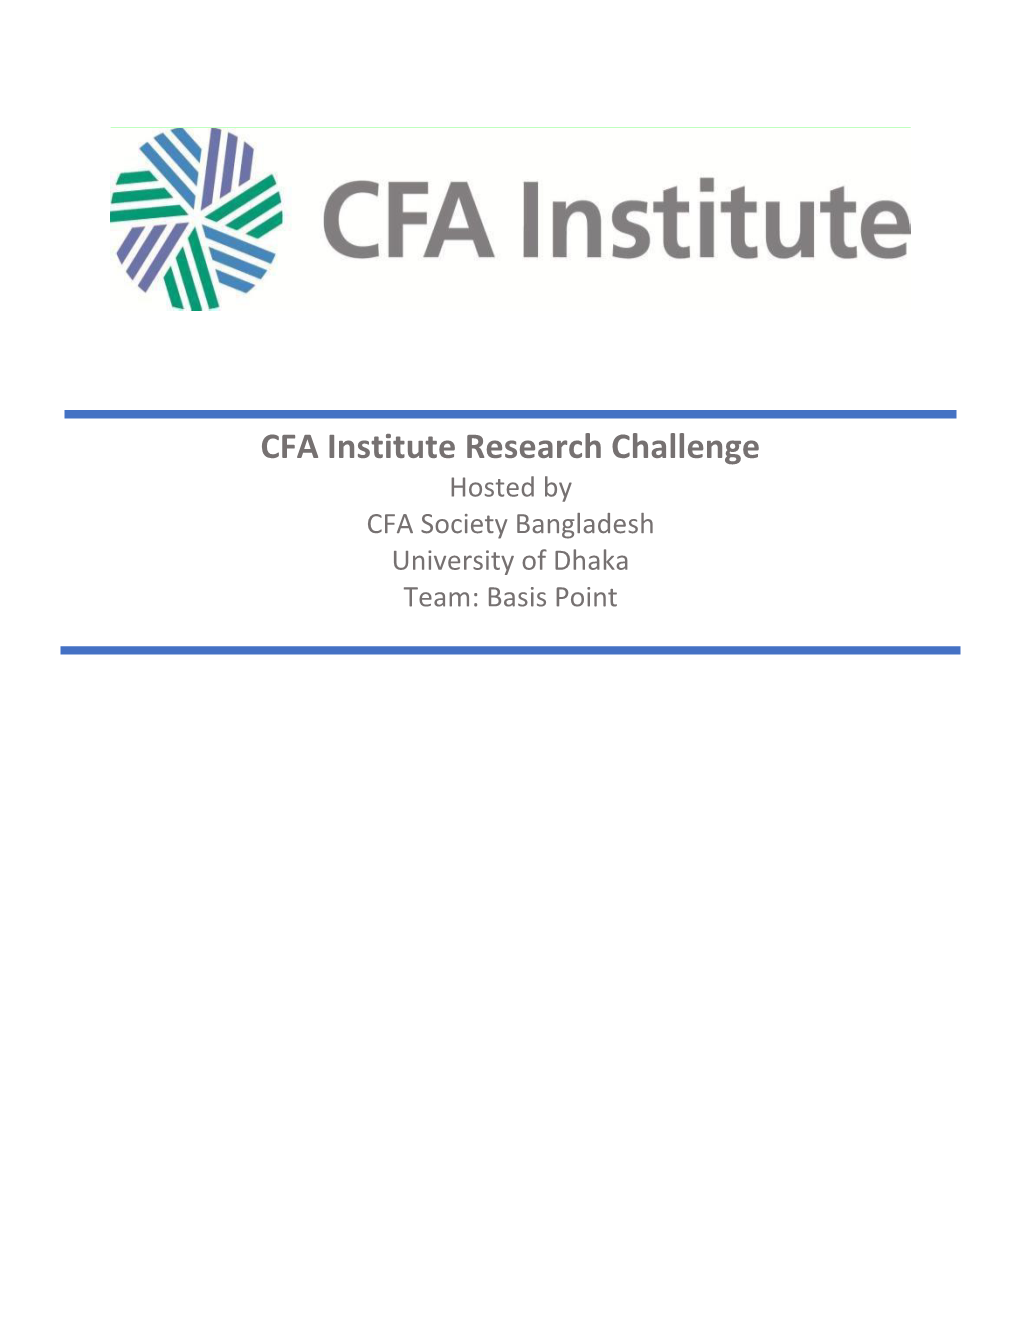 CFA Institute Research Challenge Hosted by CFA Society Bangladesh University of Dhaka Team: Basis Point